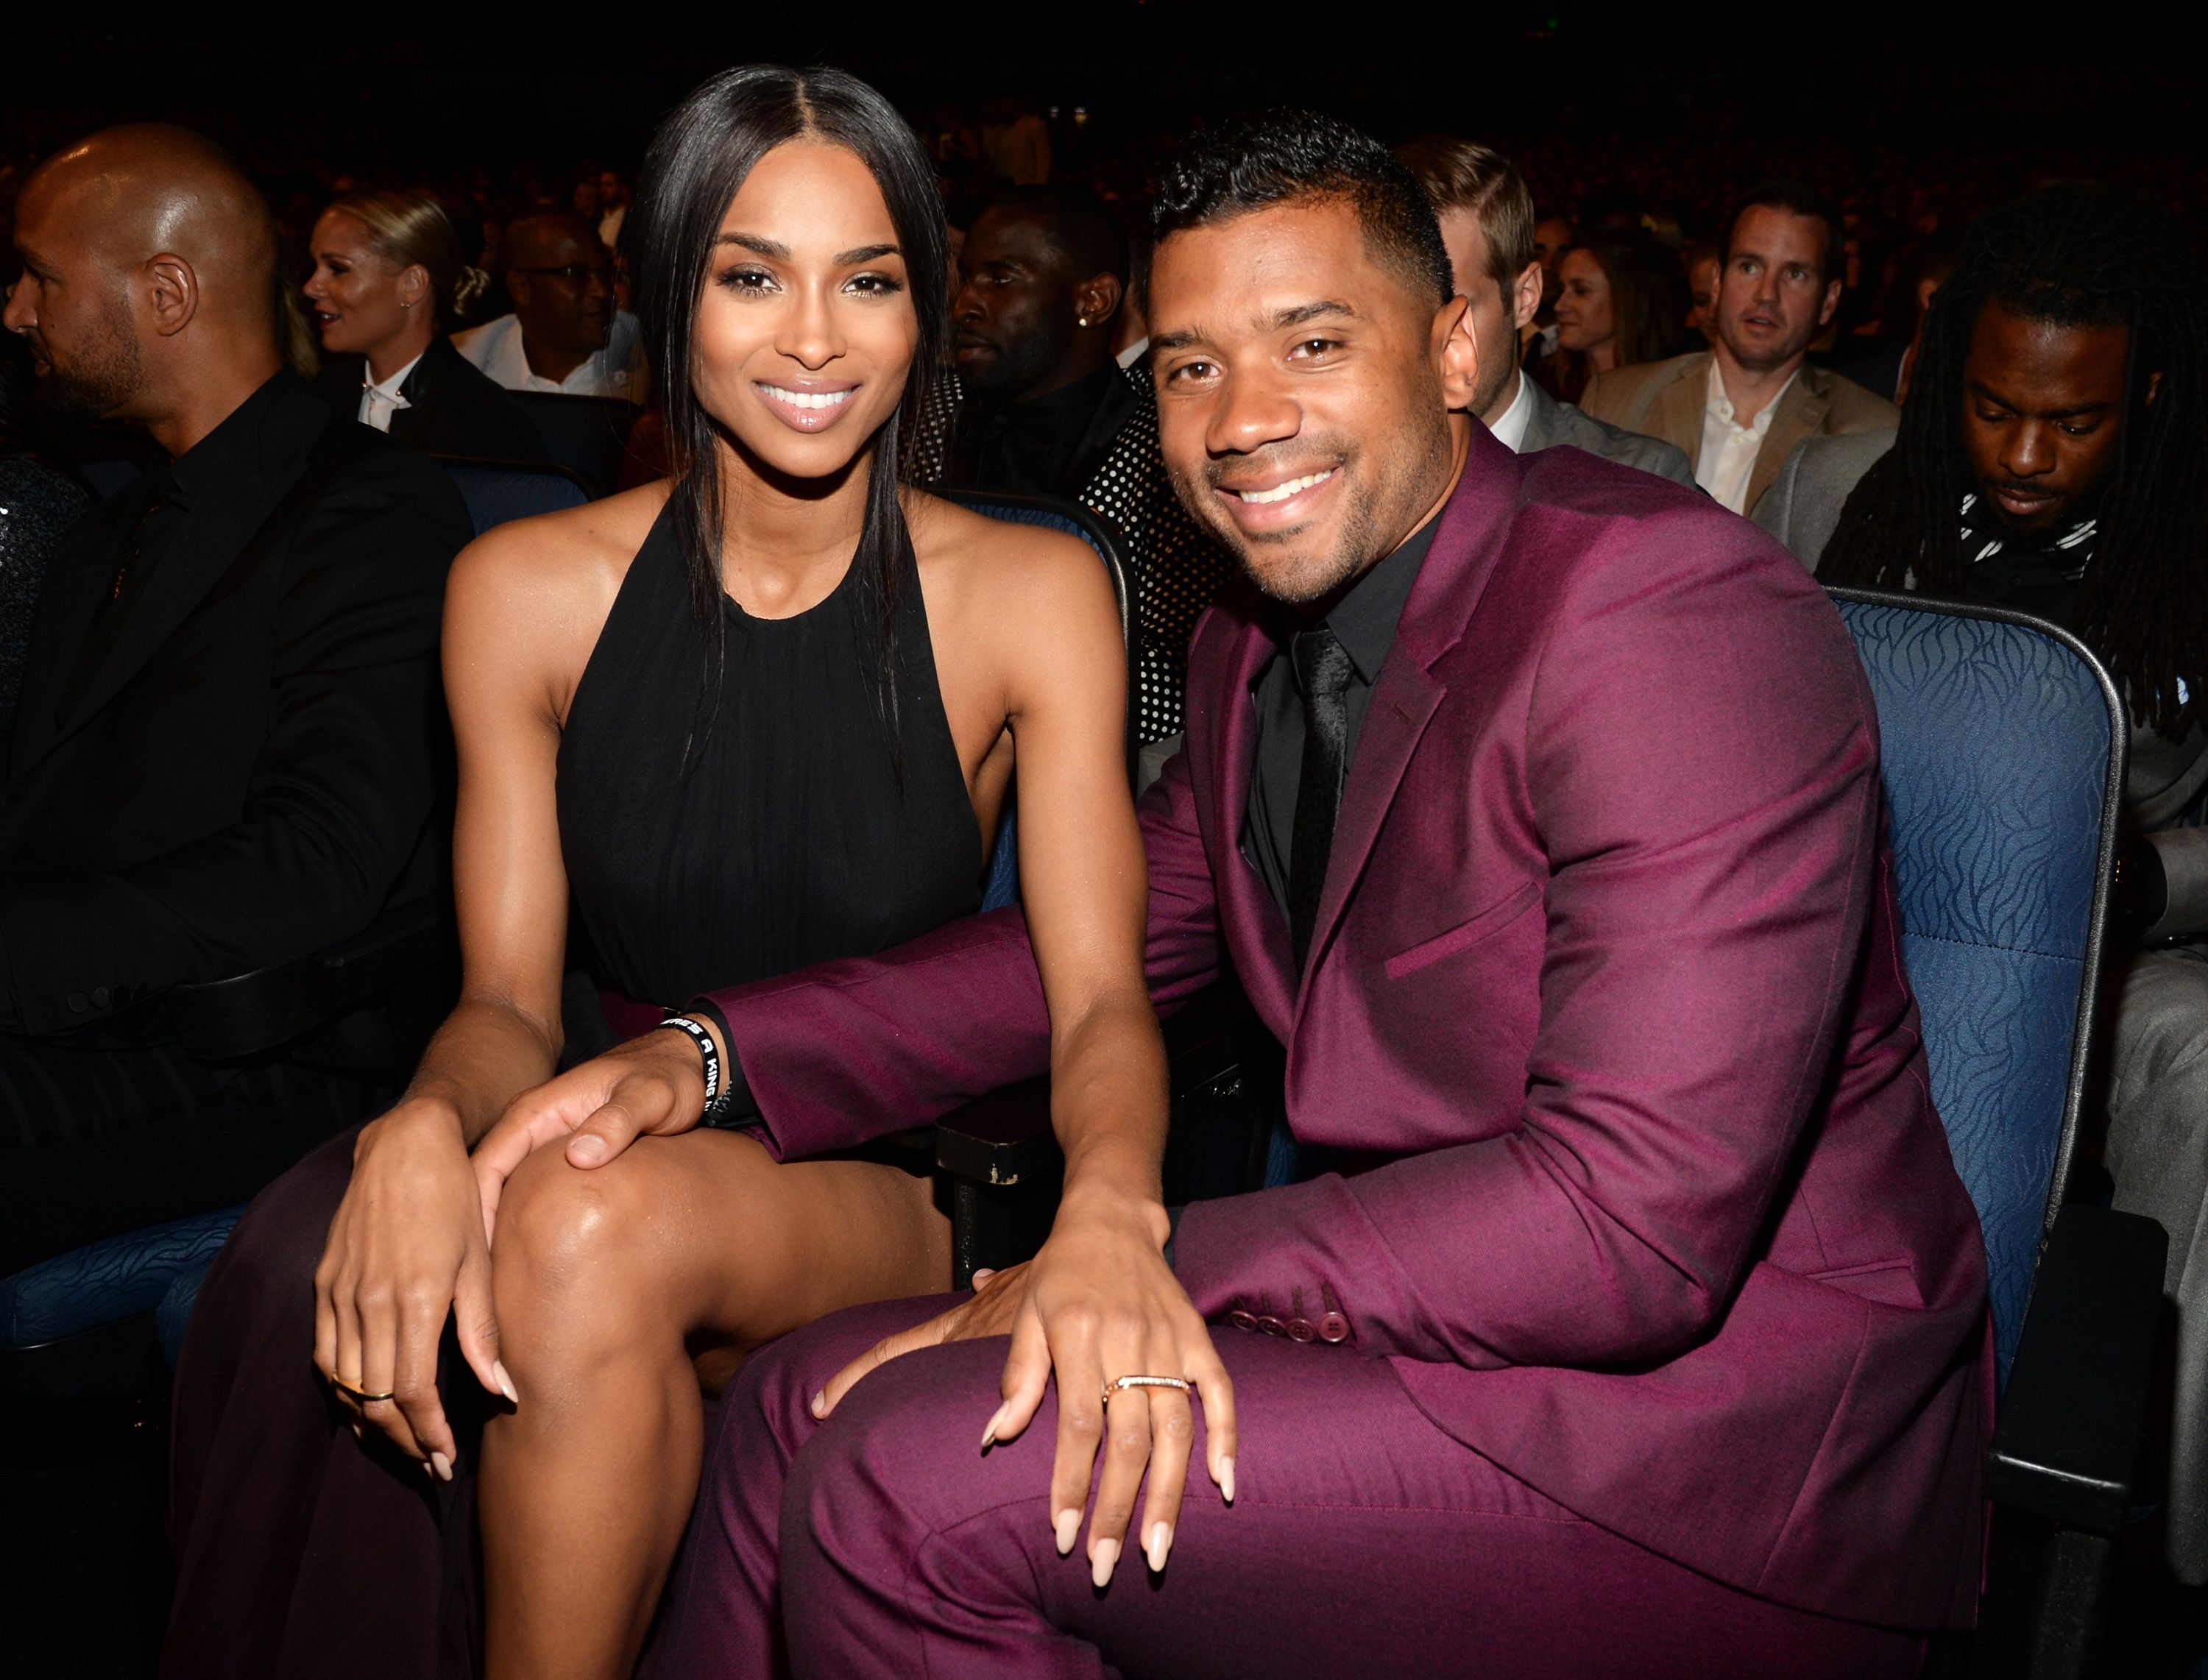 Ciara and Russell Wilson at the 2015 ESPYS at Microsoft Theater in Los Angeles, California | Photo: Kevin Mazur/WireImage